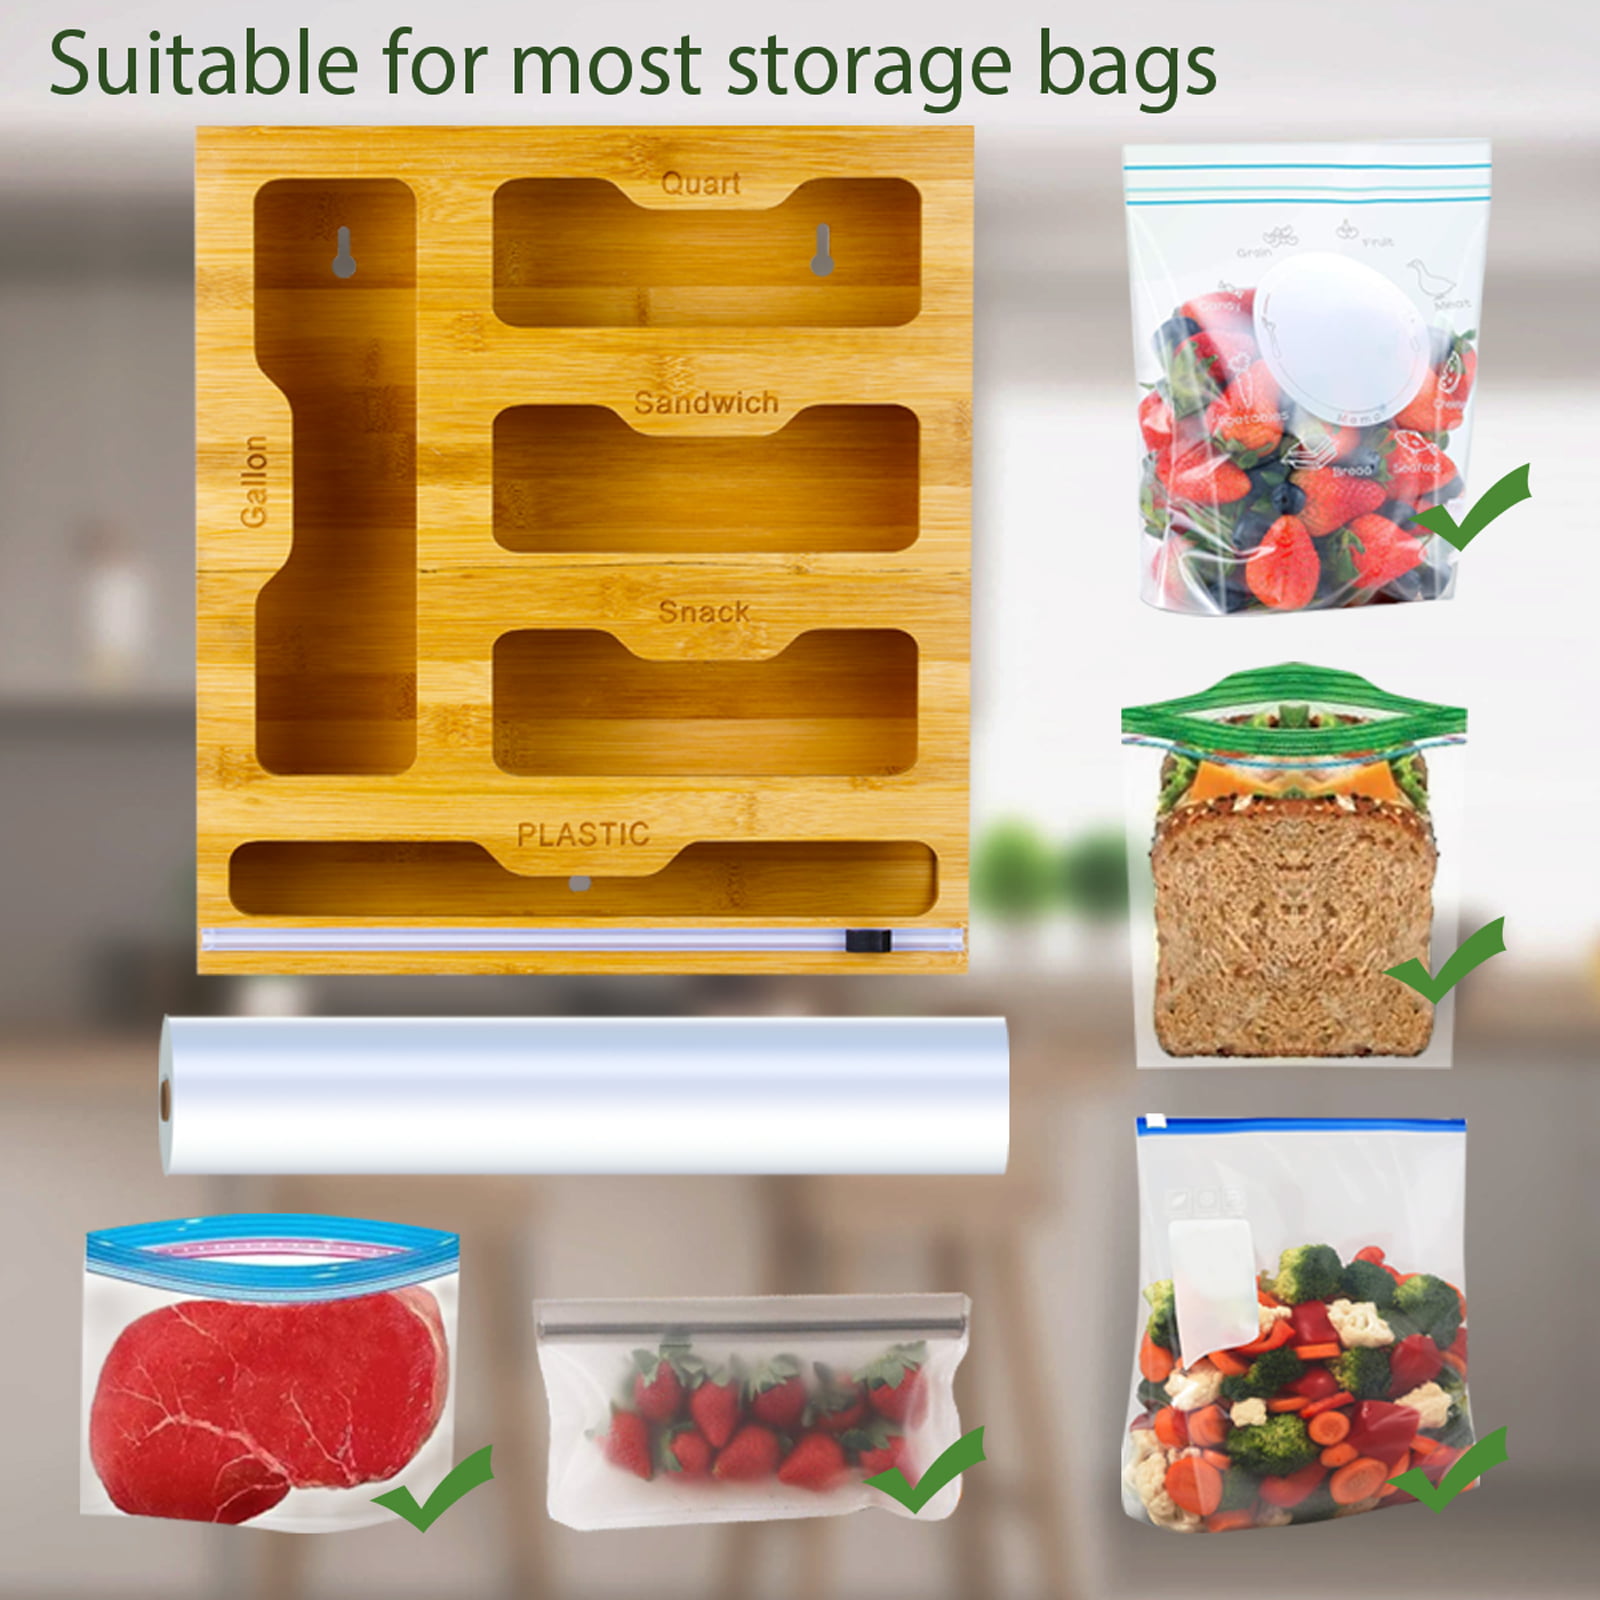 The Container Store Bamboo Plastic Bag Organizer Set of 5